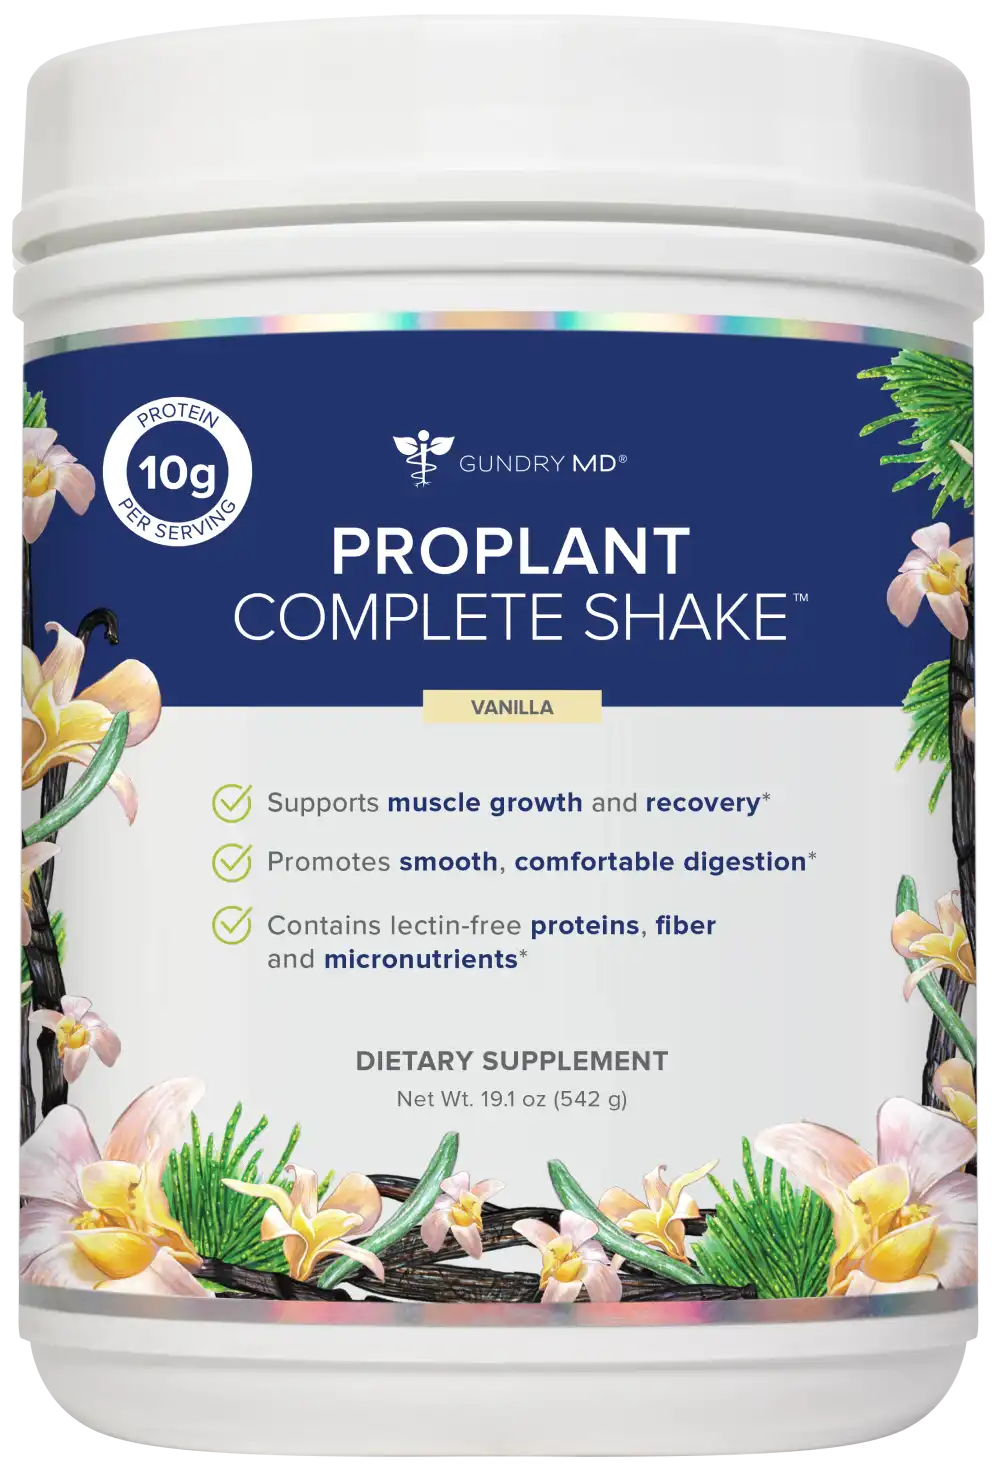 Gundry MD ProPlant Complete Shake